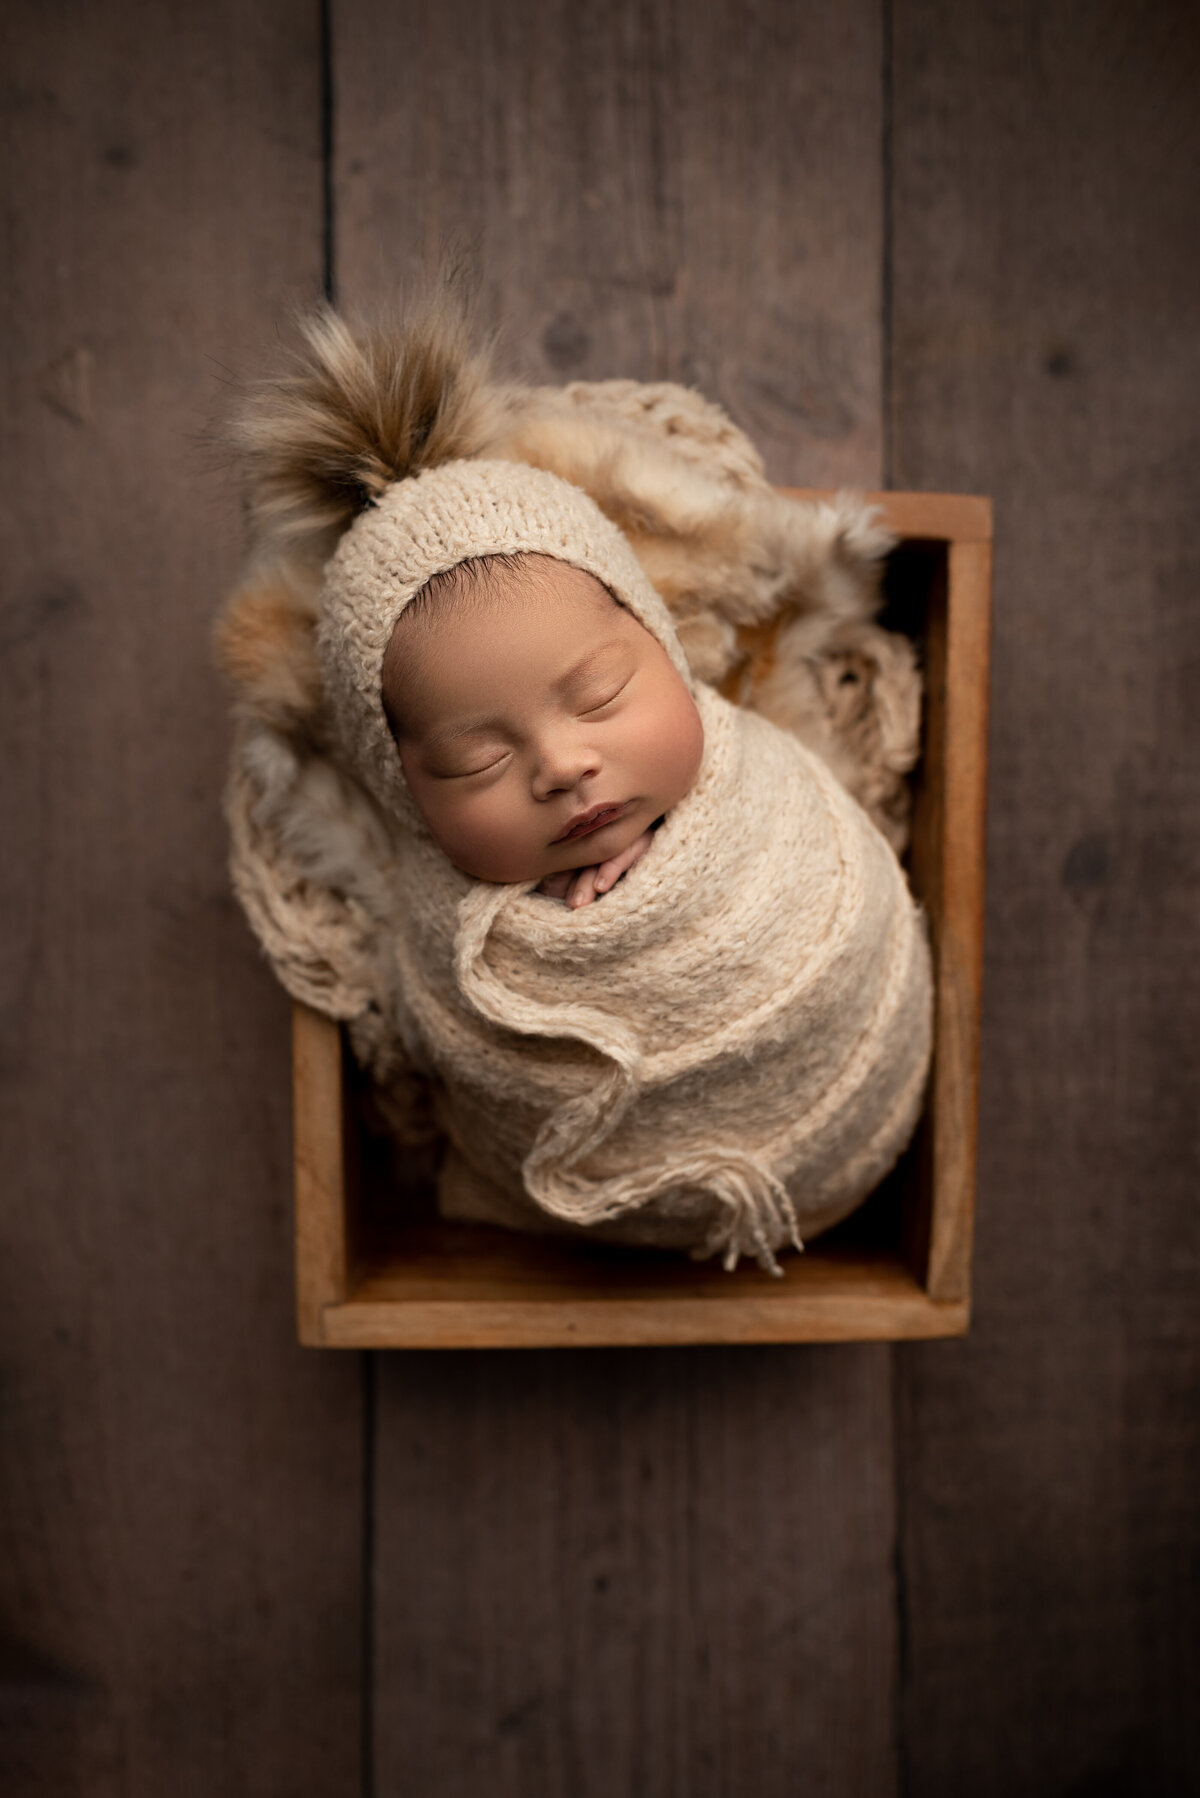 New Jersey's best newborn photographer Katie Marshall captures an aerial fine art newborn photo. Baby is swaddled in an oat-coloured knit swaddle and matching bonnet. Baby's fingers are peeking out.